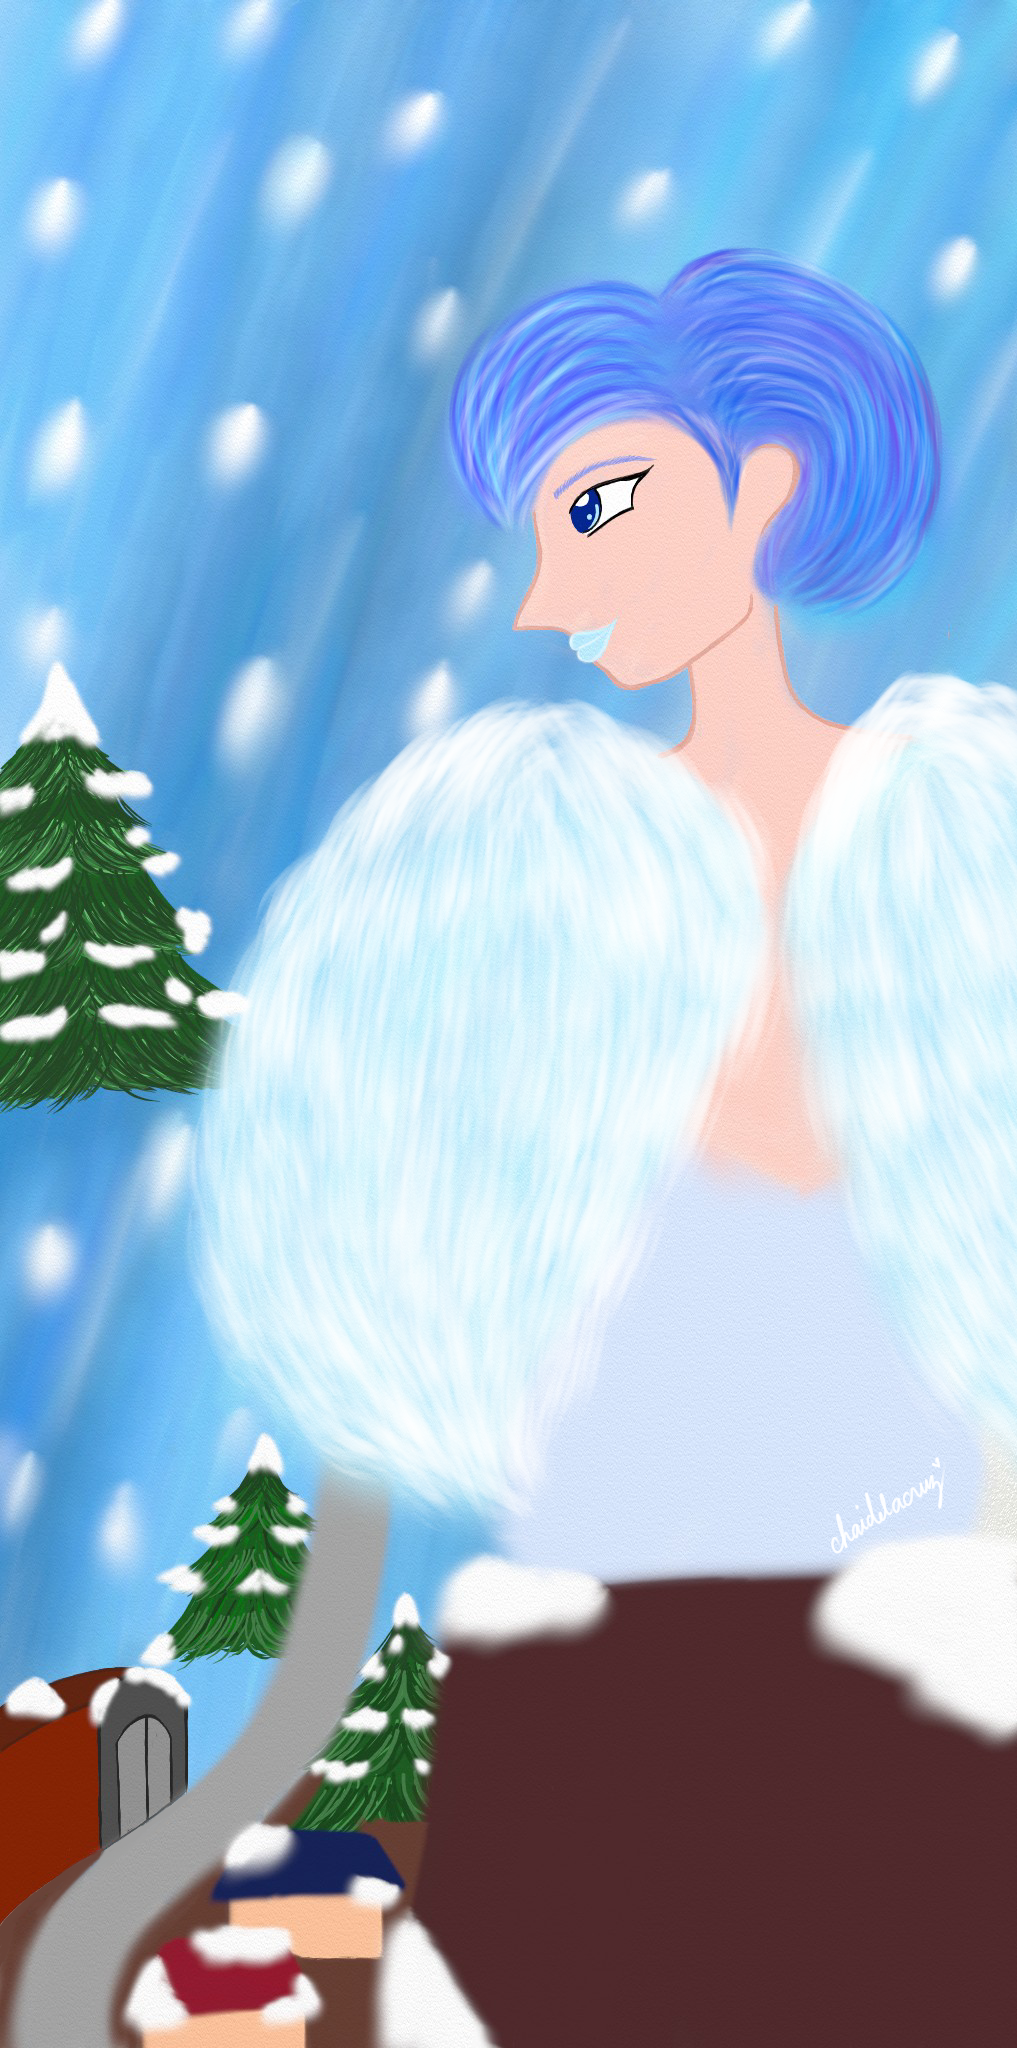 Painting Of The Winged Watcher In Ibispaintartrage Size